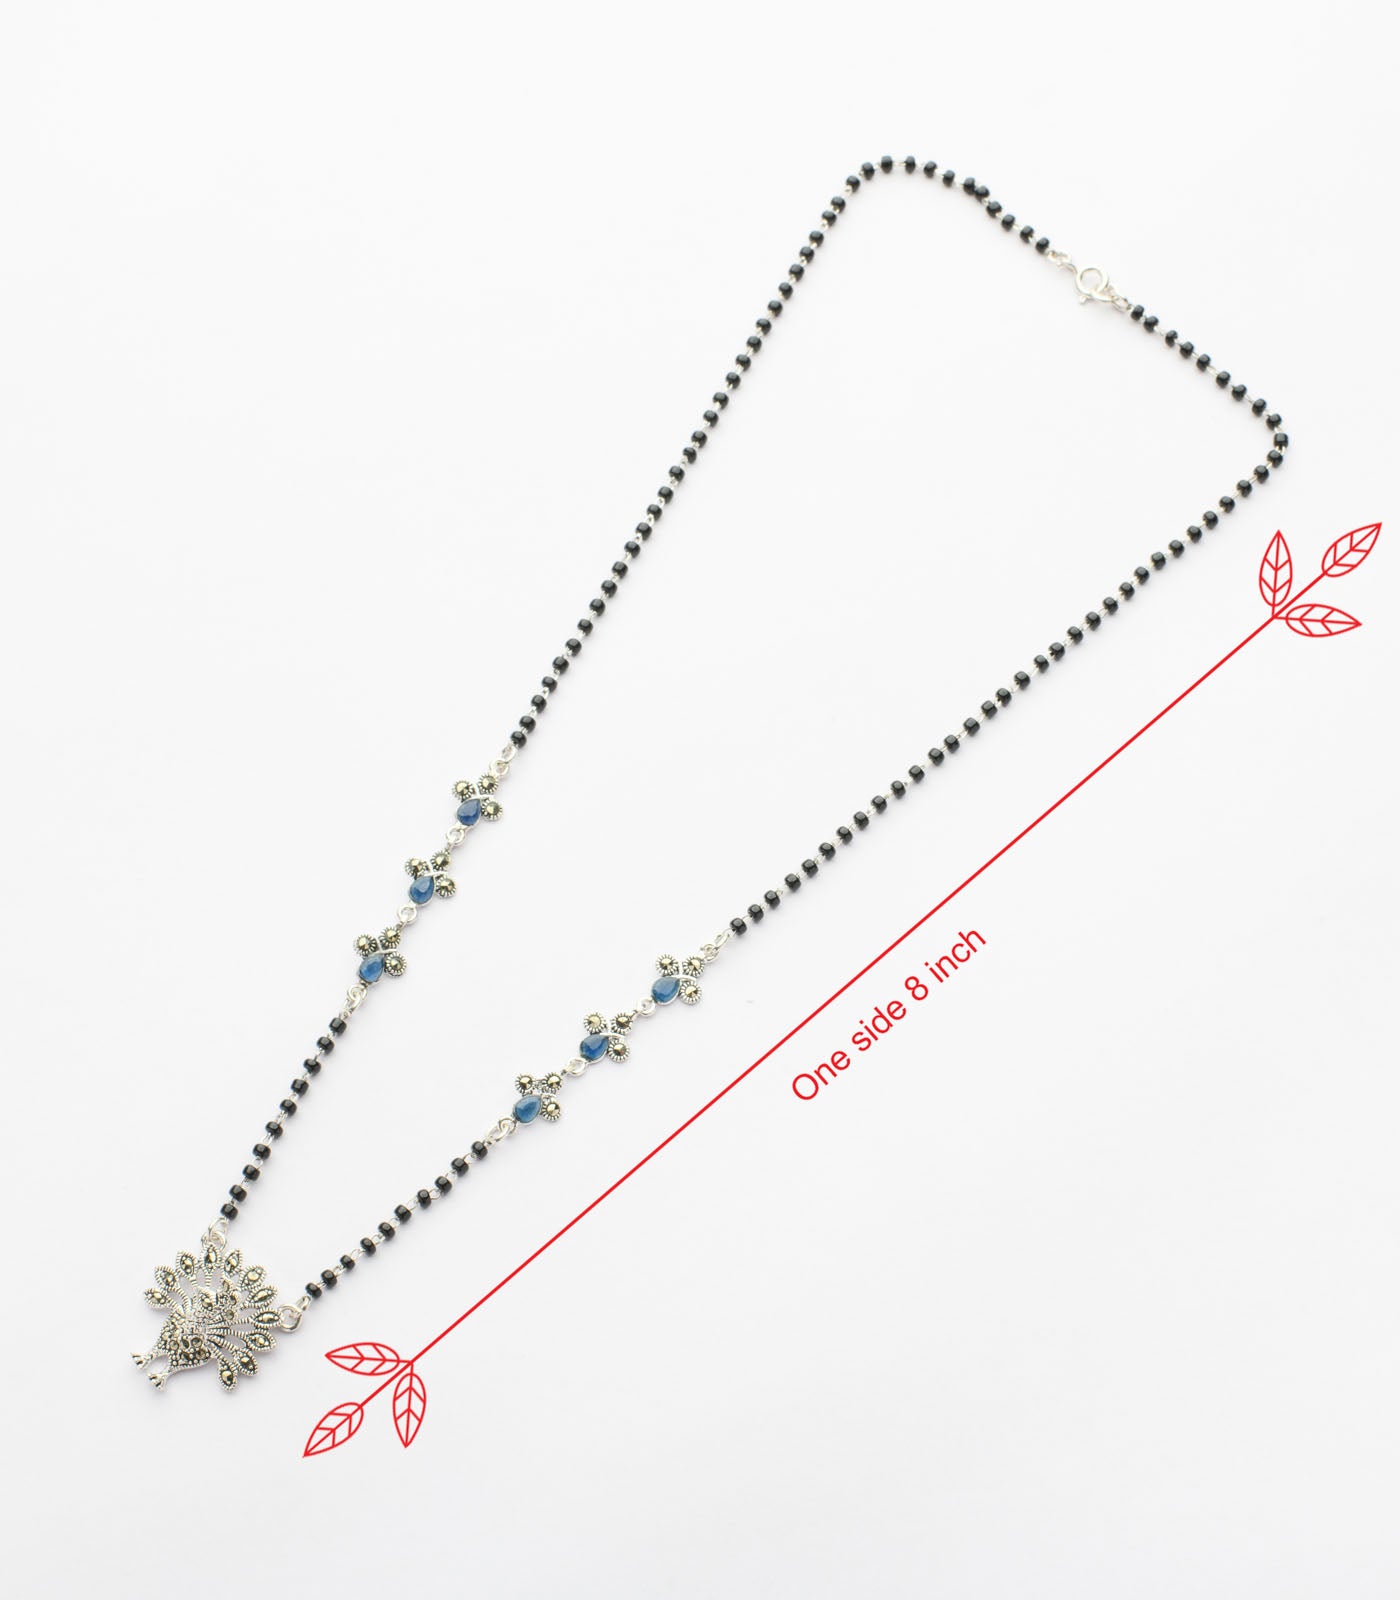 Peacock Mangalsutra (Silver)